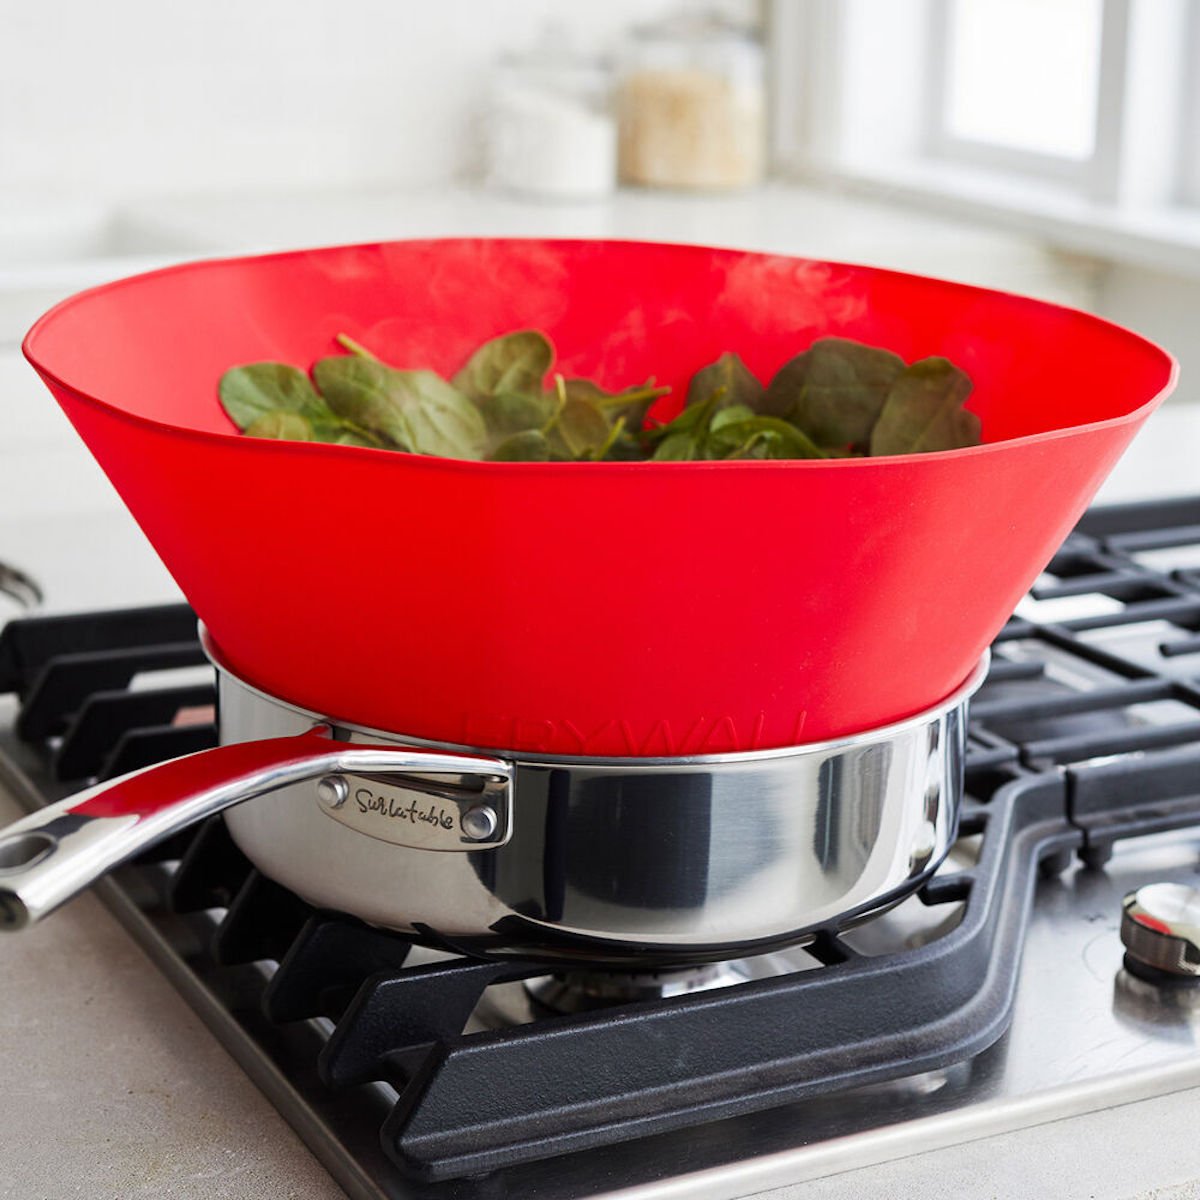 Kitchen Products That People Can't Stop Buying